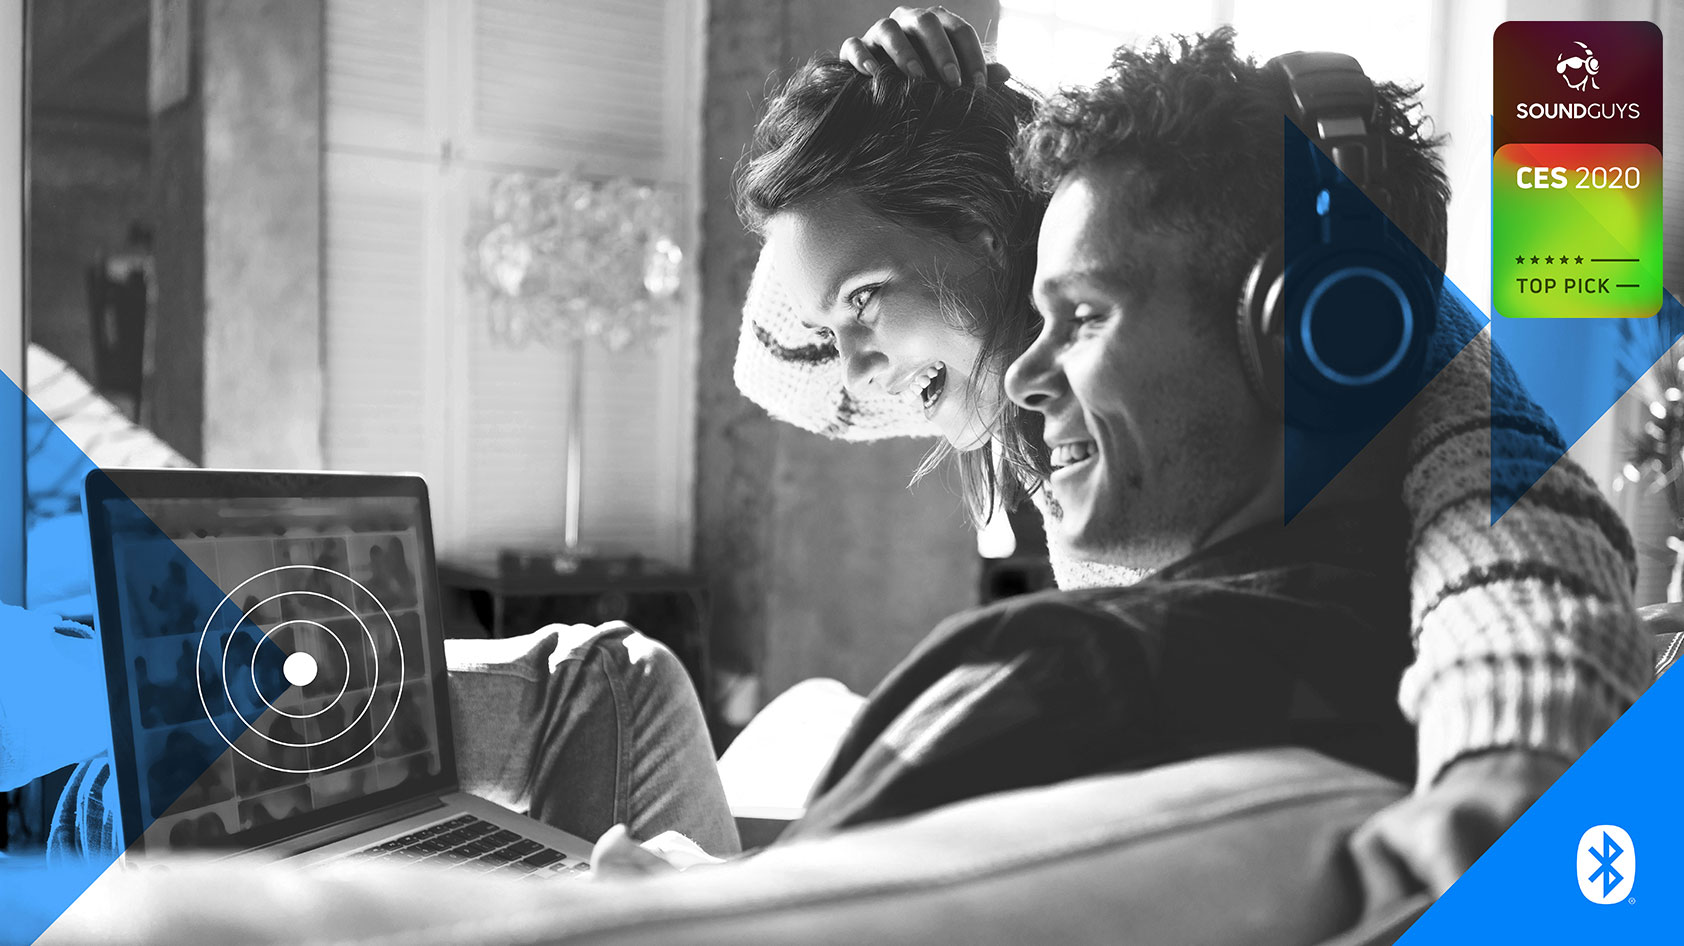 A manufacturer's photo of a man and a woman listening to headphones in front of a computer, with the Bluetooth logo in the corner.